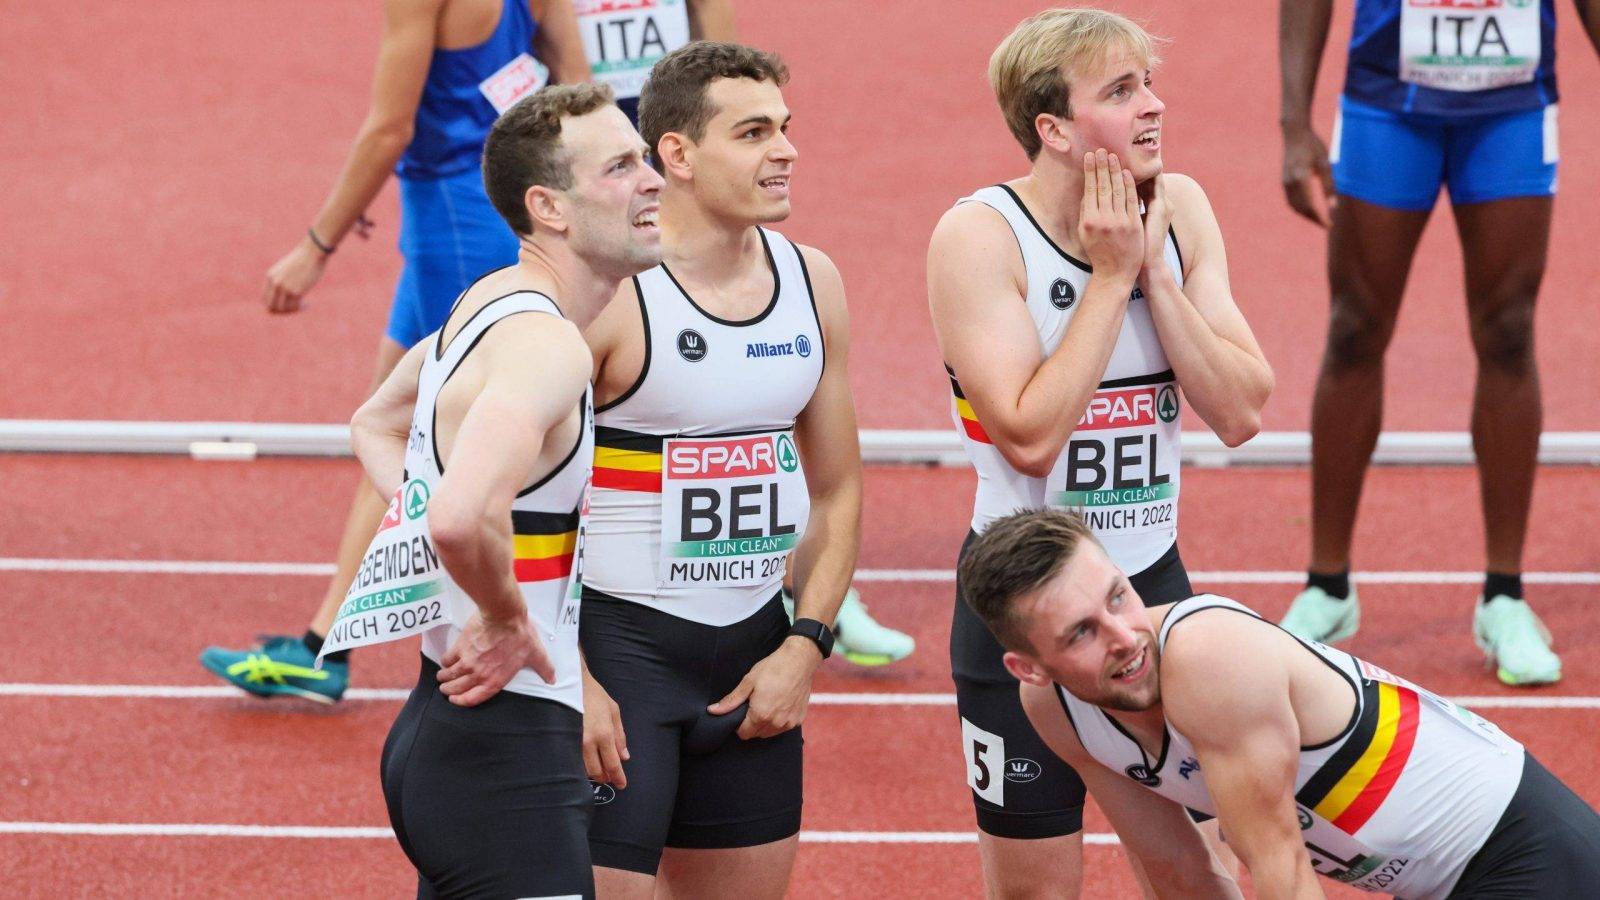 belgian falcons pictured after the men 4x100m relay heat on the ninth day of the Athletics European Championships, at Munich 2022, Germany, on Friday 19 August 2022. The second edition of the European Championships takes place from 11 to 22 August and features nine sports. BELGA PHOTO BENOIT DOPPAGNE